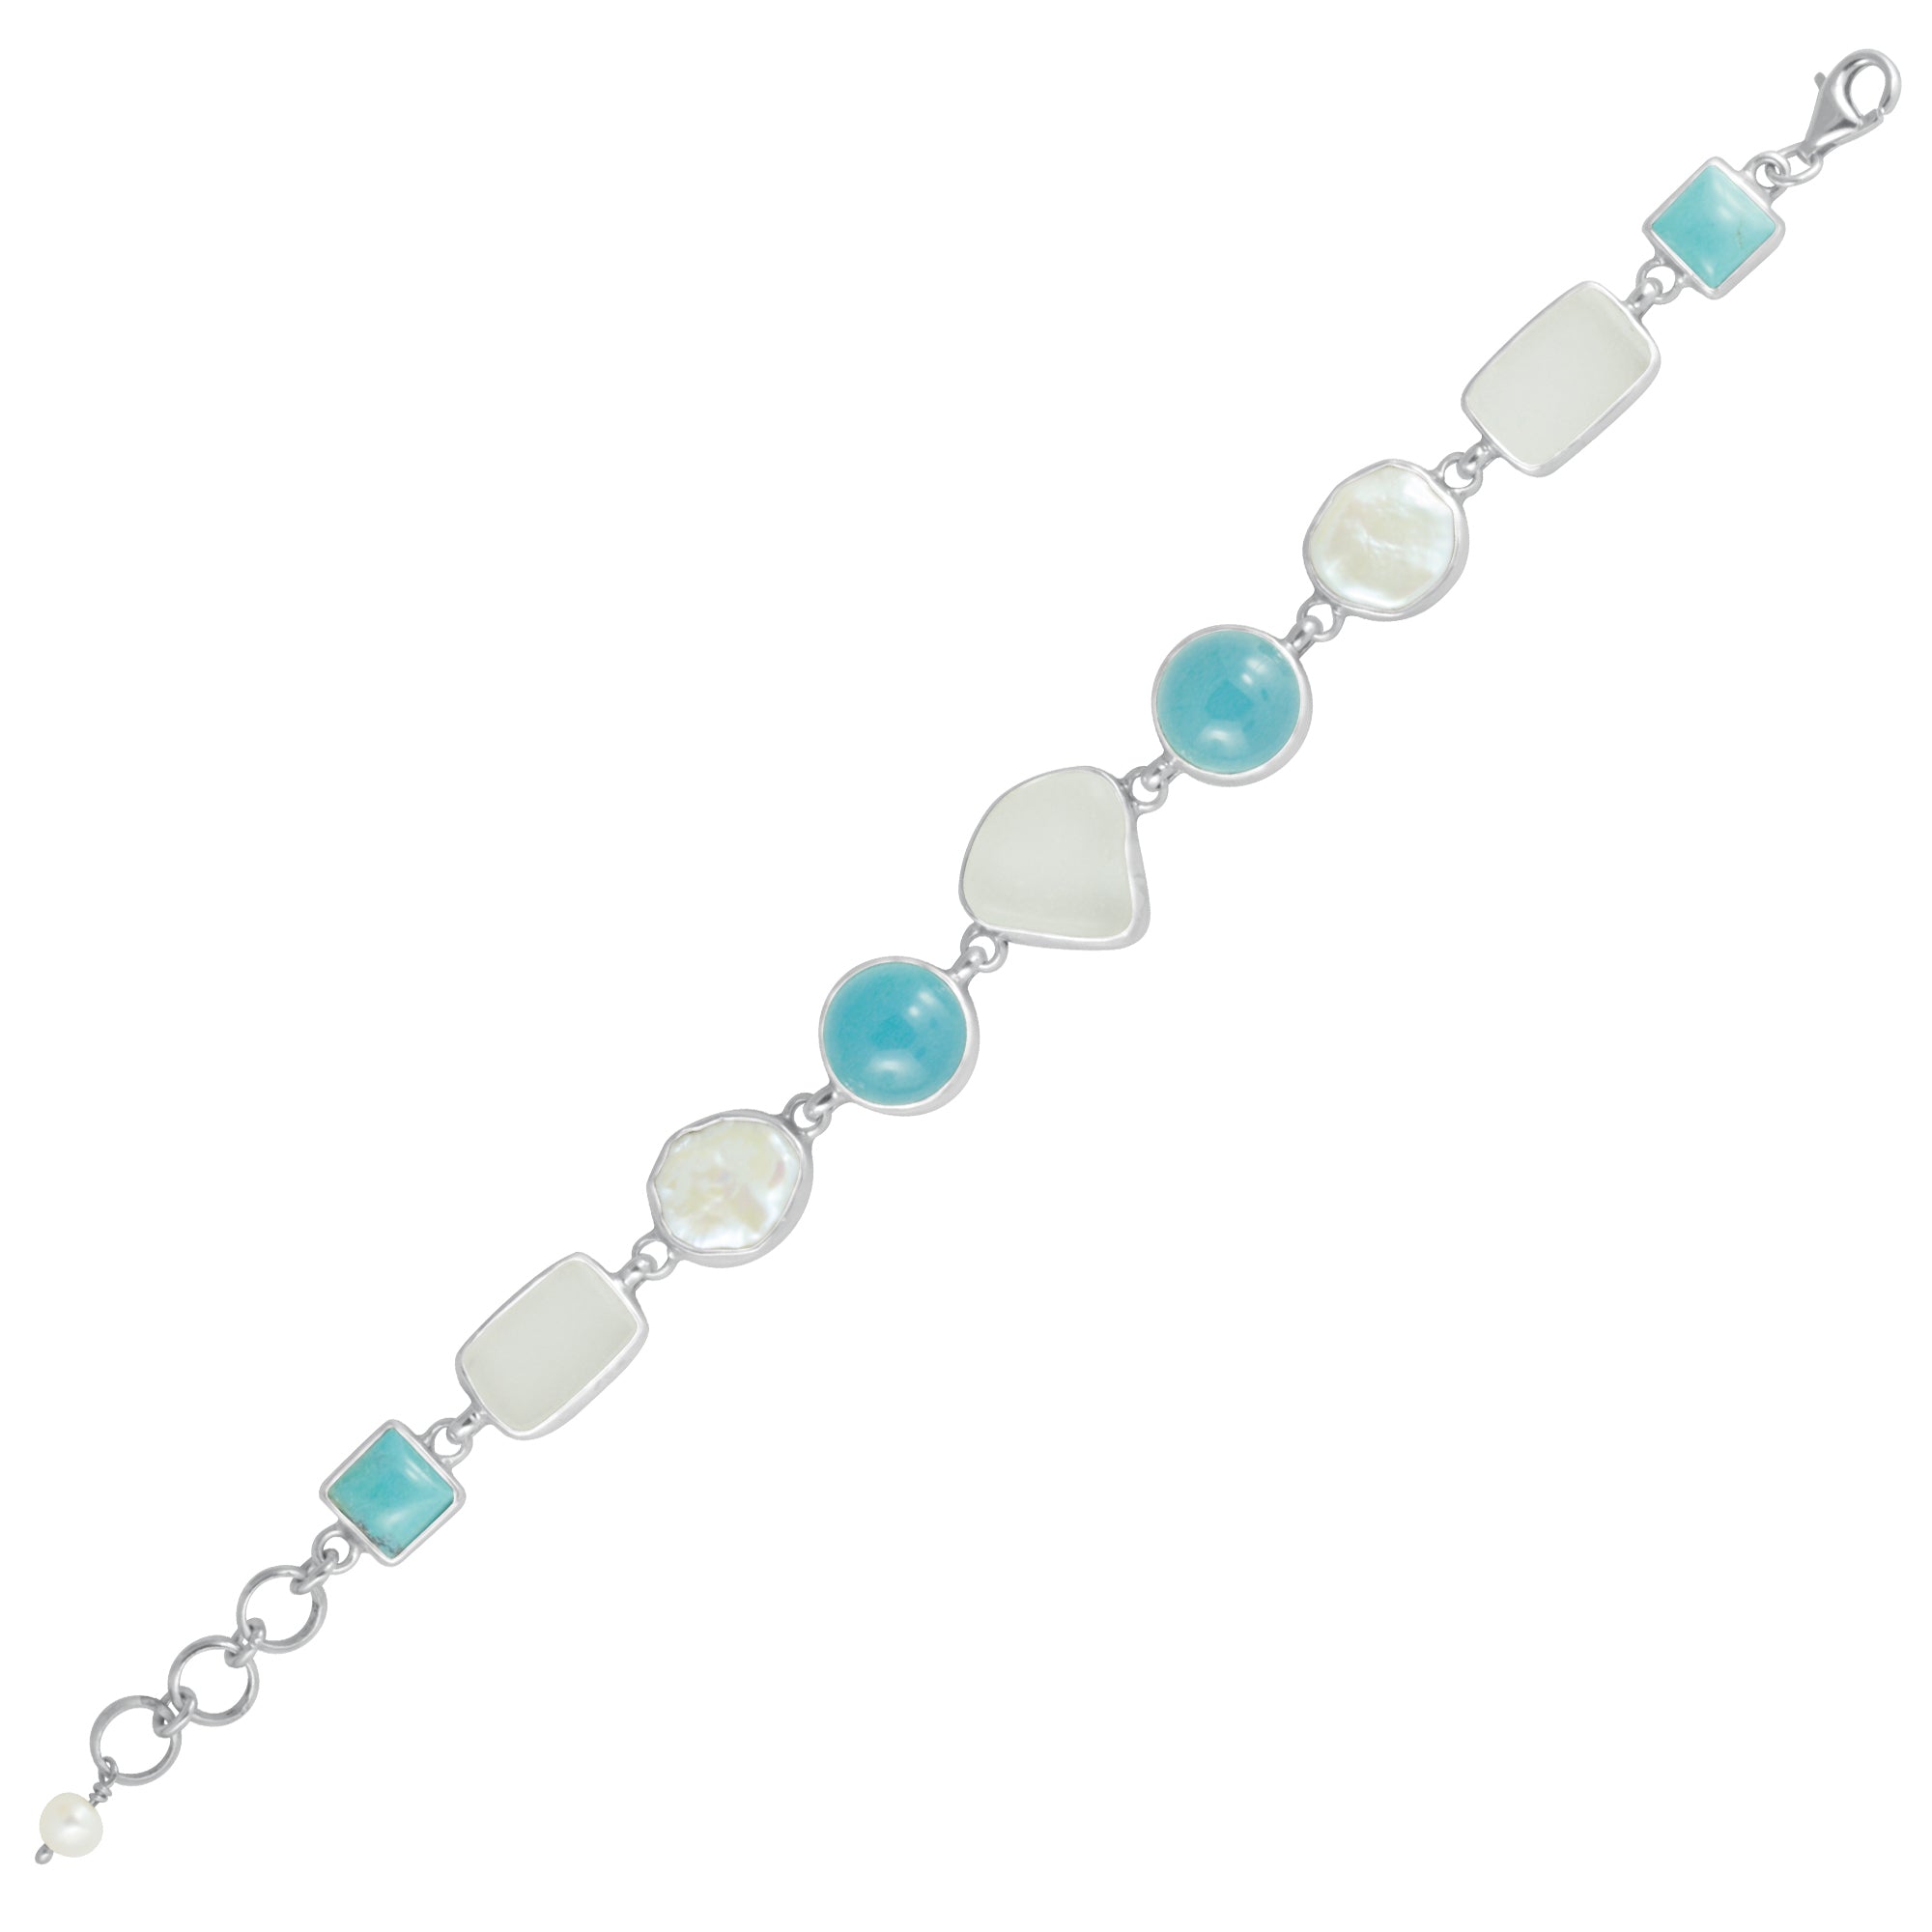 Sterling Silver Bracelet With Sea Glass White, Pearl, Turquoise Square, Ocean Chaldiny Round